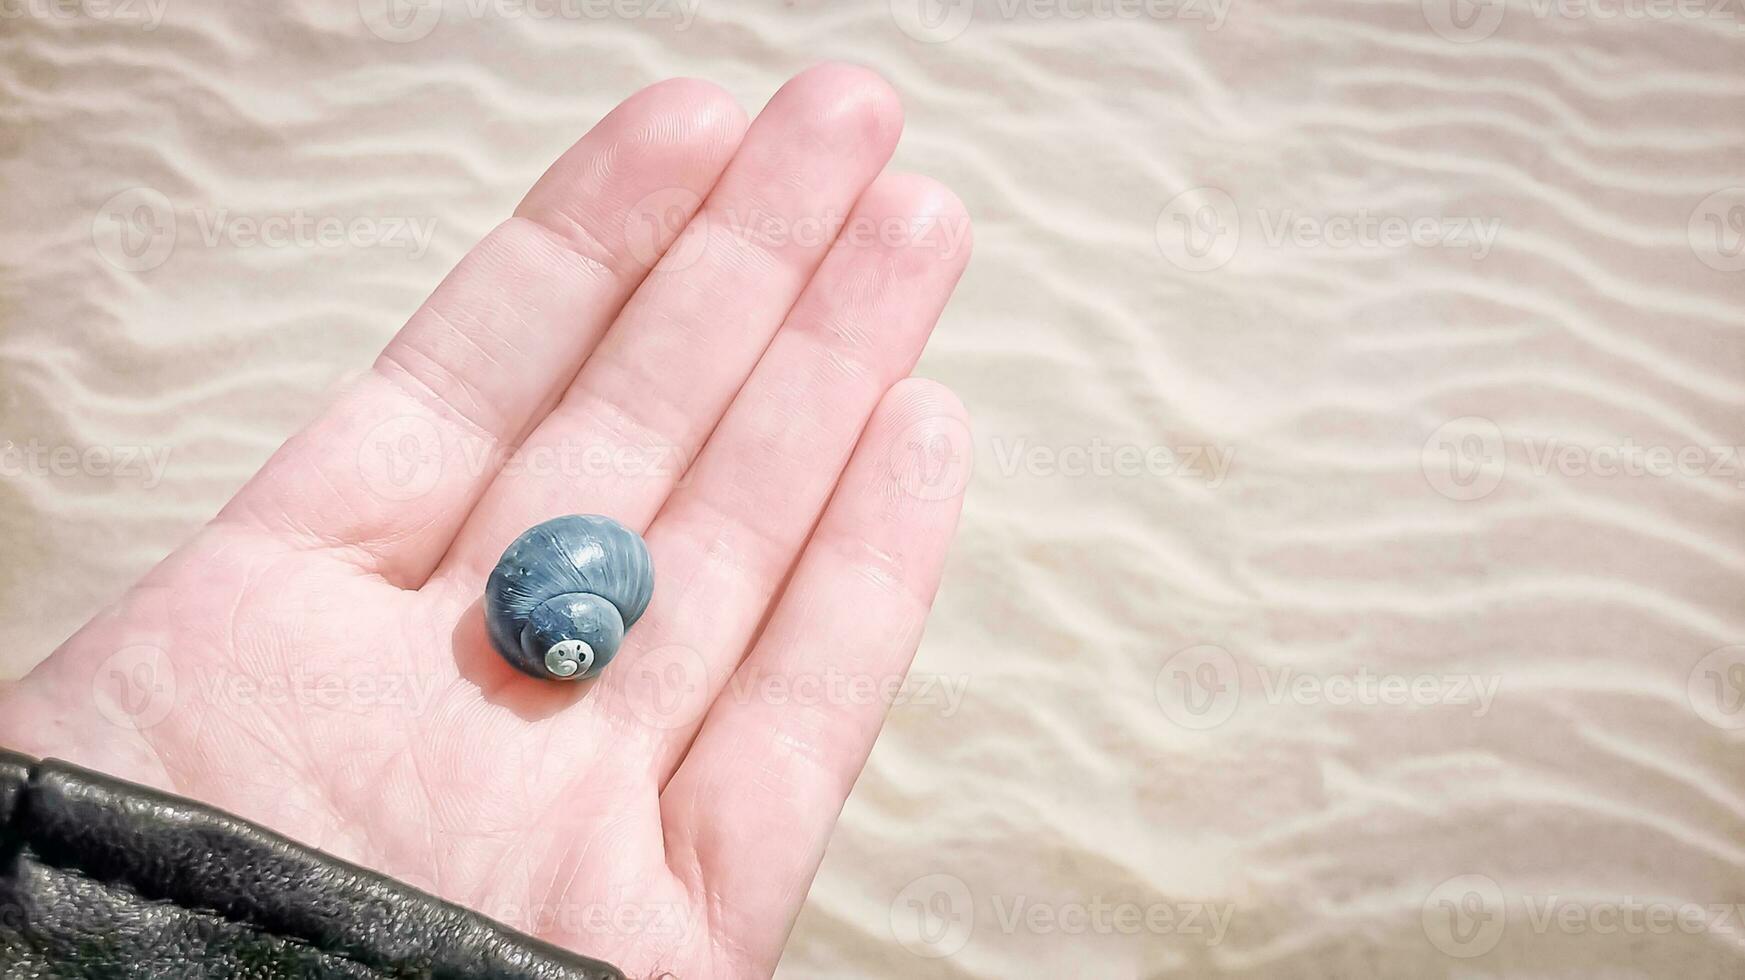 Beautiful blue seashell on the hand palm against a wavy sand beach background photo